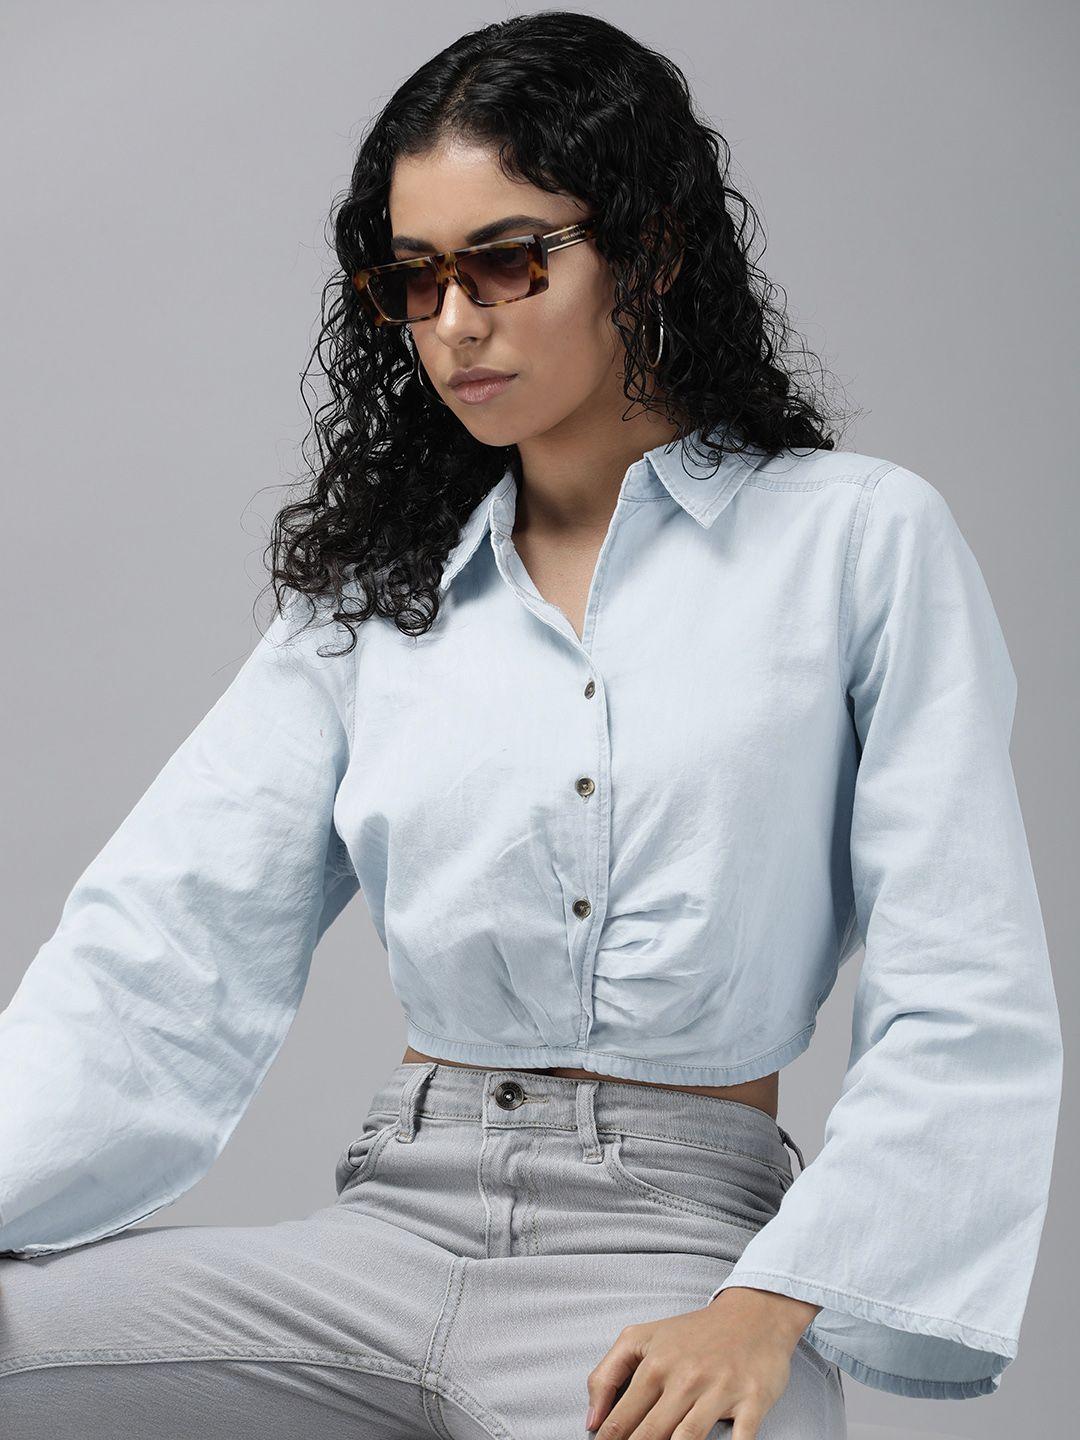 the roadster lifestyle co. pure cotton flared sleeves chambray shirt style crop top